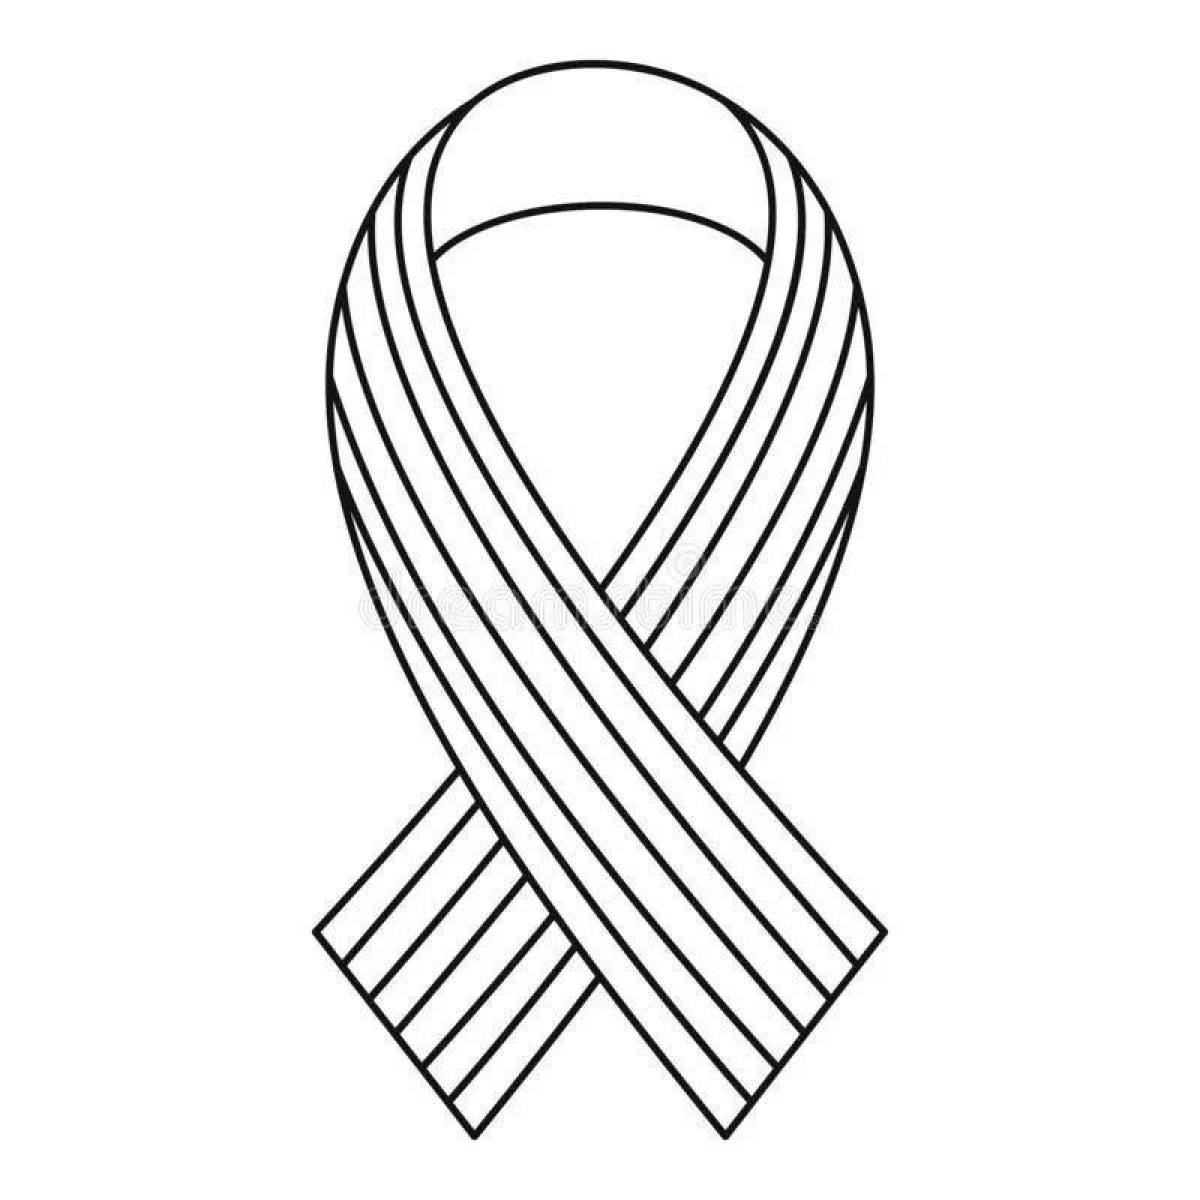 Exquisite drawing of St. George ribbon